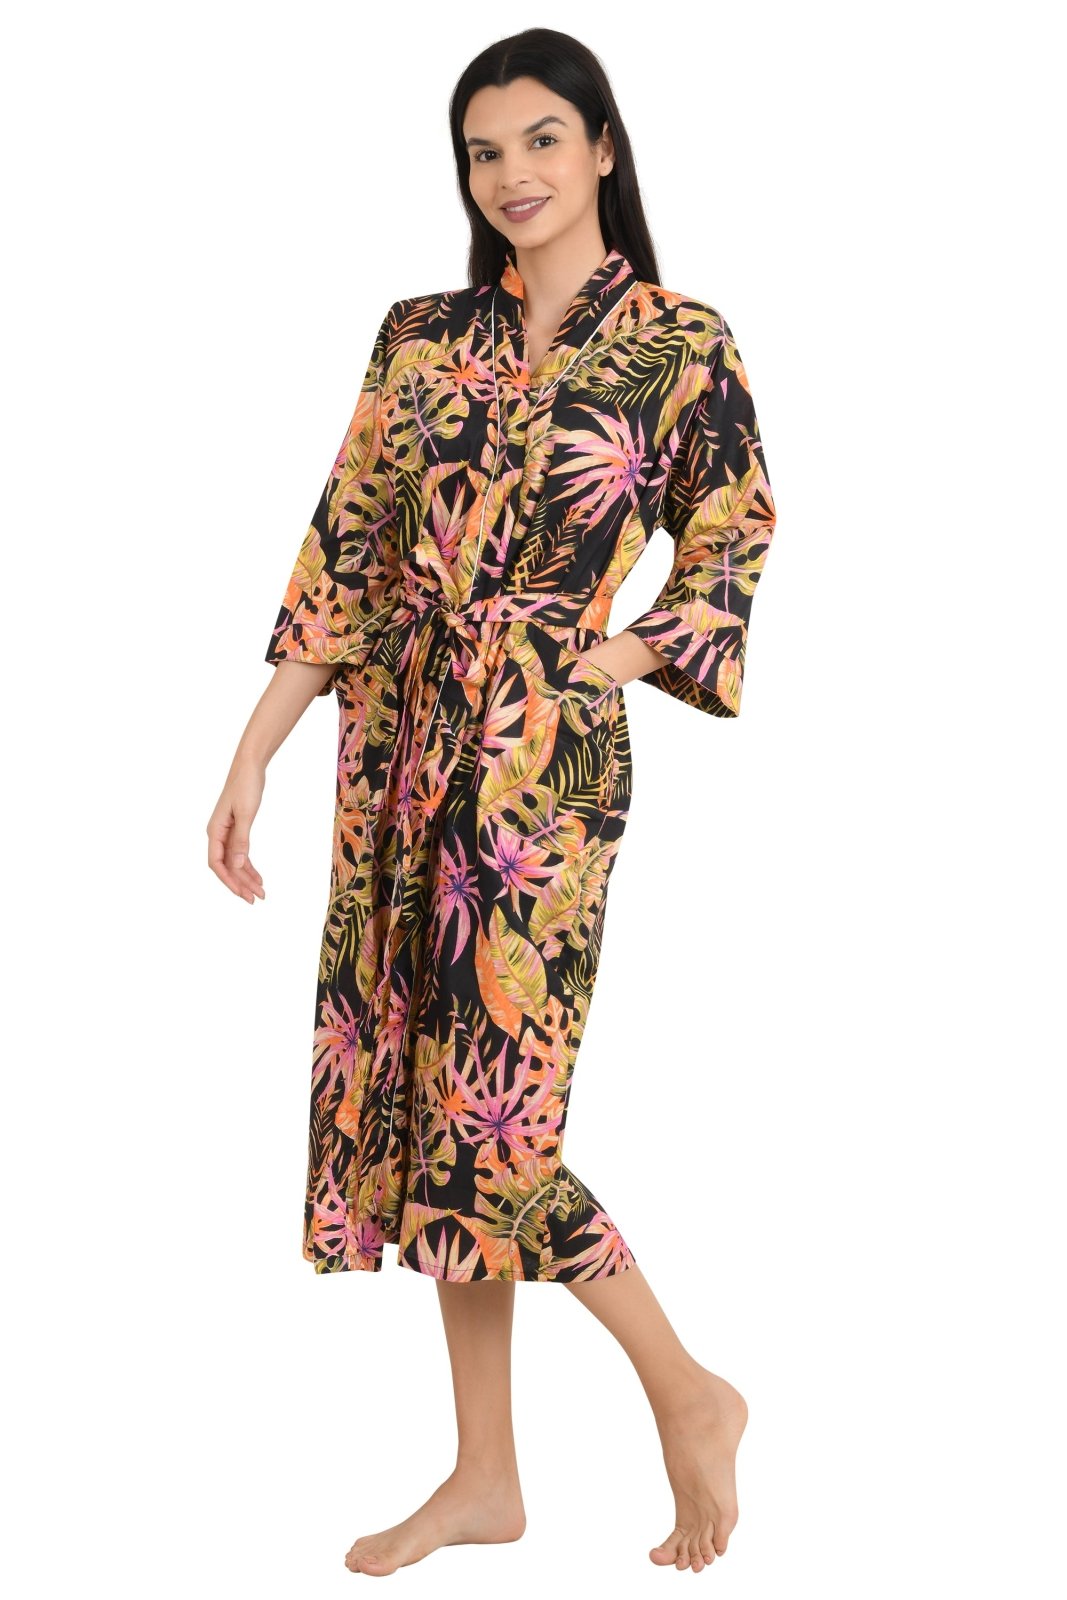 Boho Cotton Kimono House Robe Indian Handprinted Leaf Floral Print Pattern | Lightweight Summer Luxury Beach Holidays Yacht Cover Up Stunning Dress - The Eastern Loom